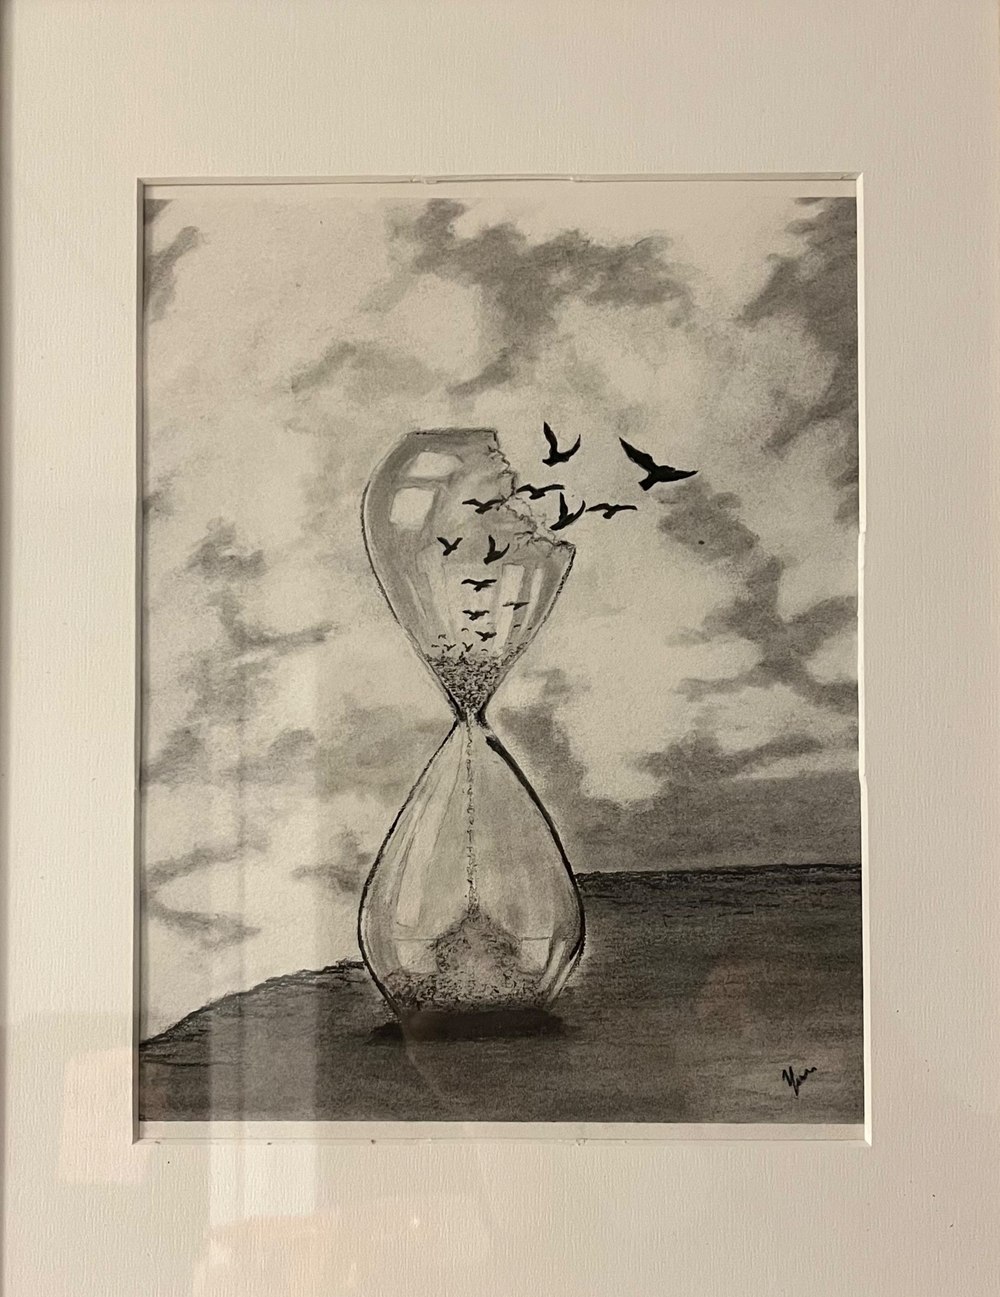 Hourglass and birds